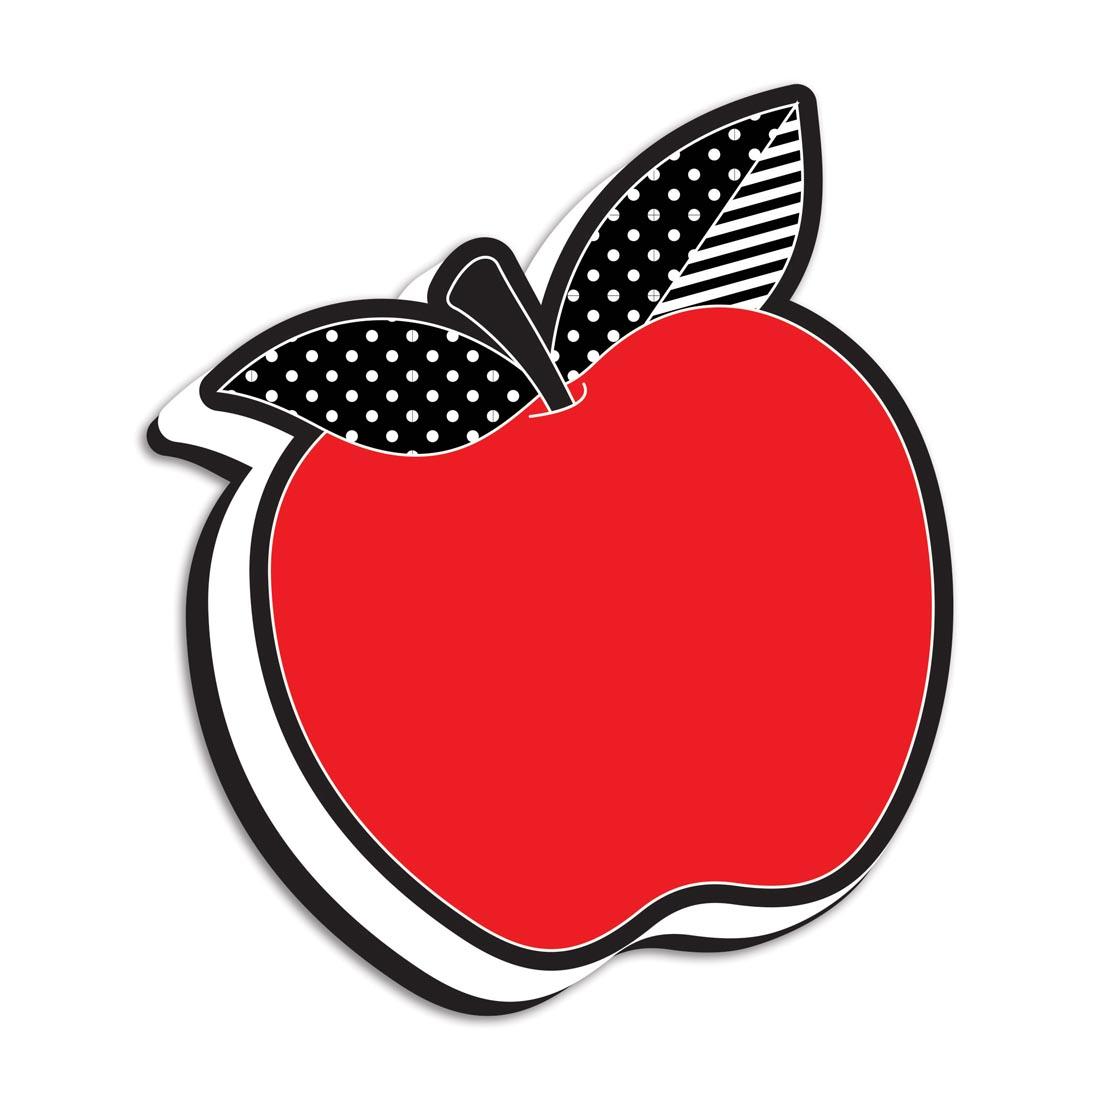 Black & White Dots Red Apple Magnetic Whiteboard Eraser by Ashley